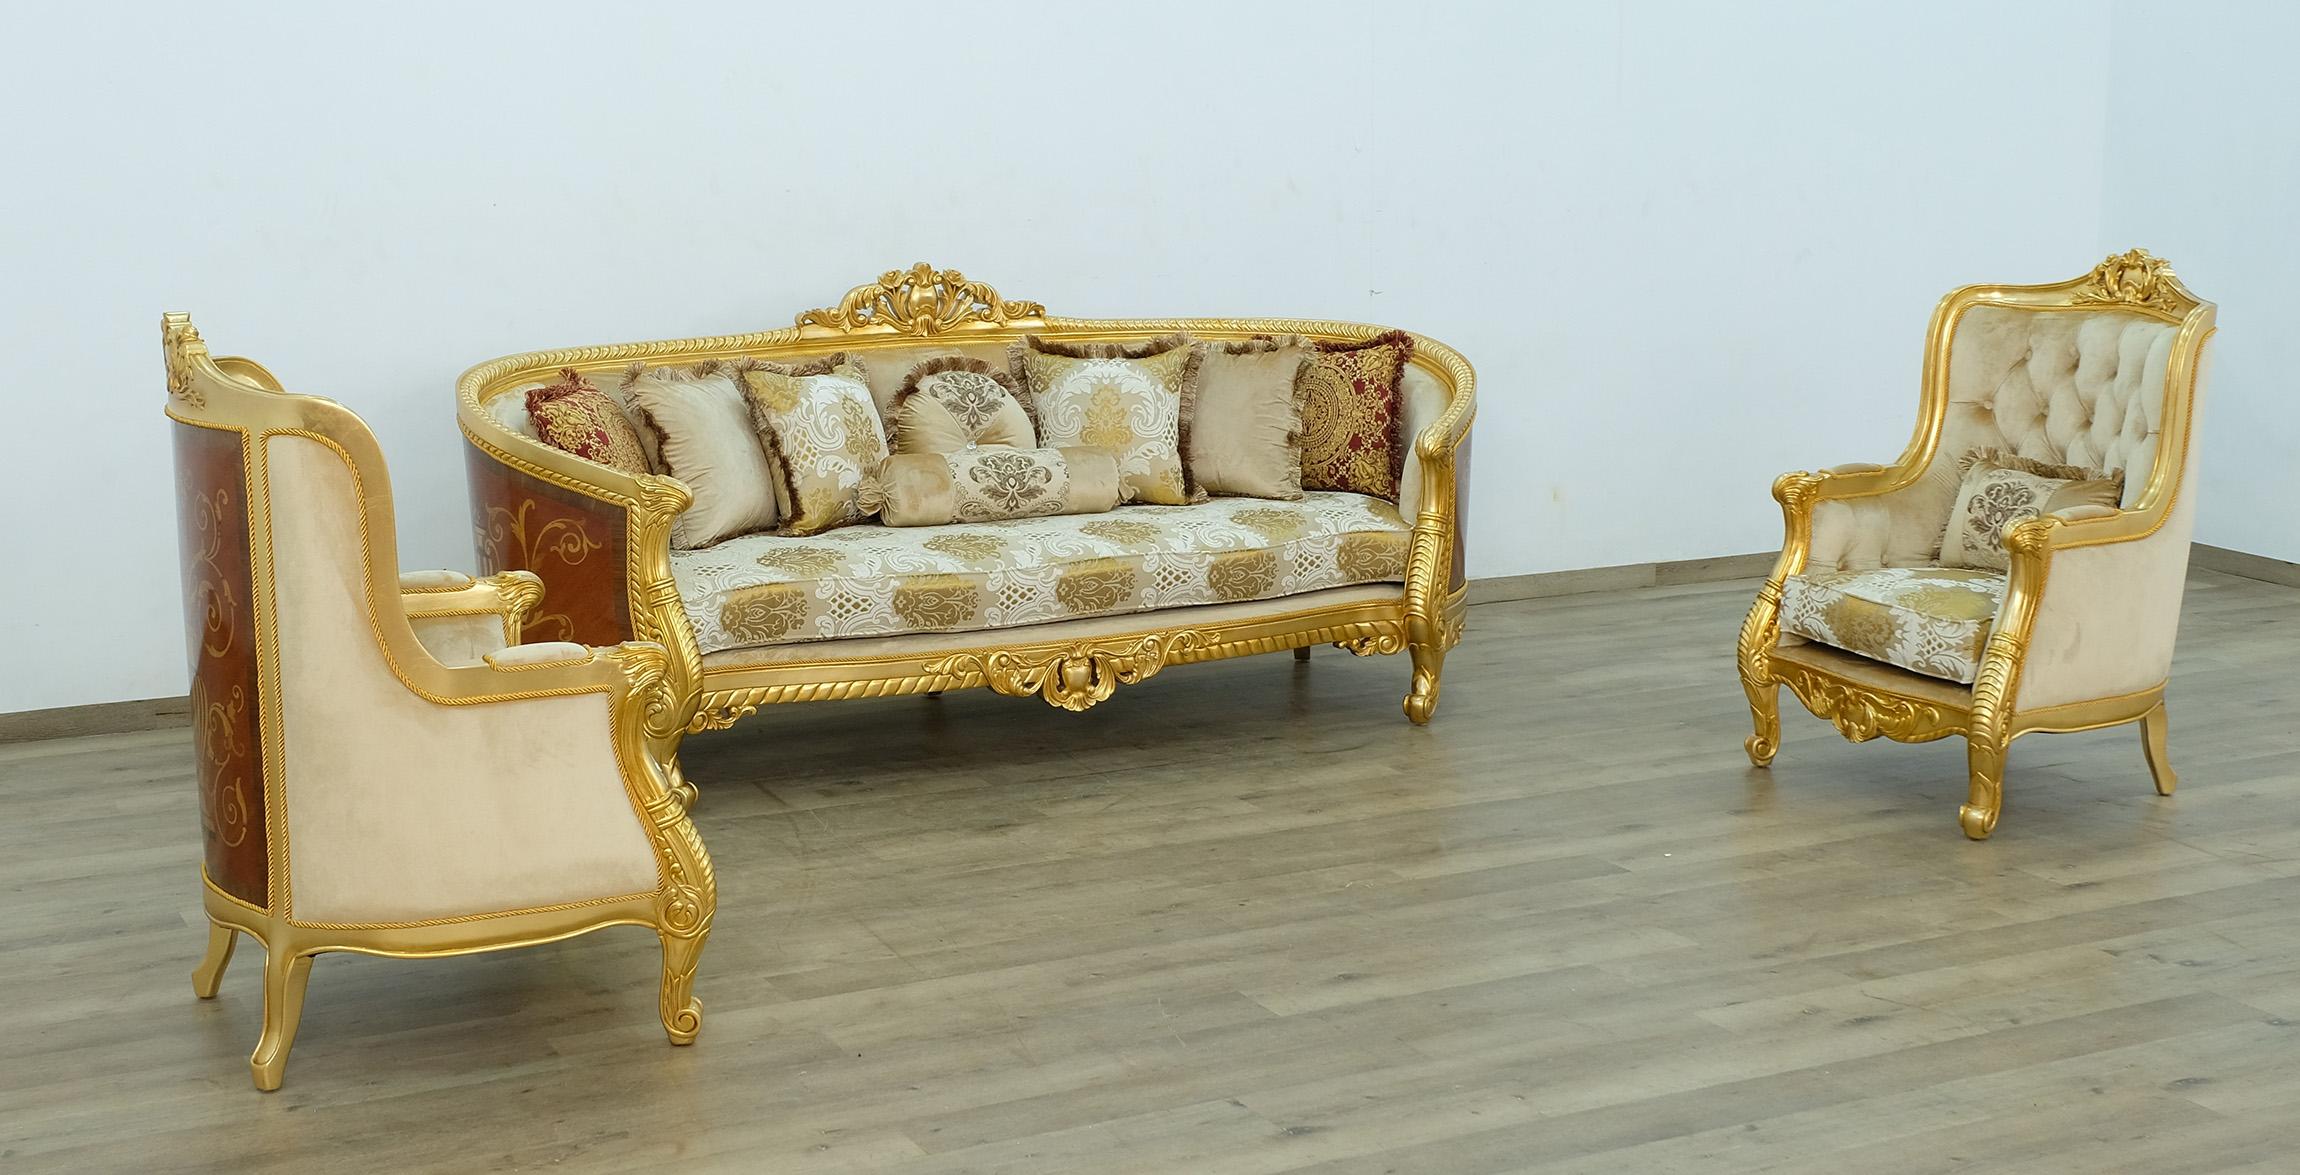 

    
Imperial Luxury Gold Fabric LUXOR Sofa Set 3Ps EUROPEAN FURNITURE Solid Wood
